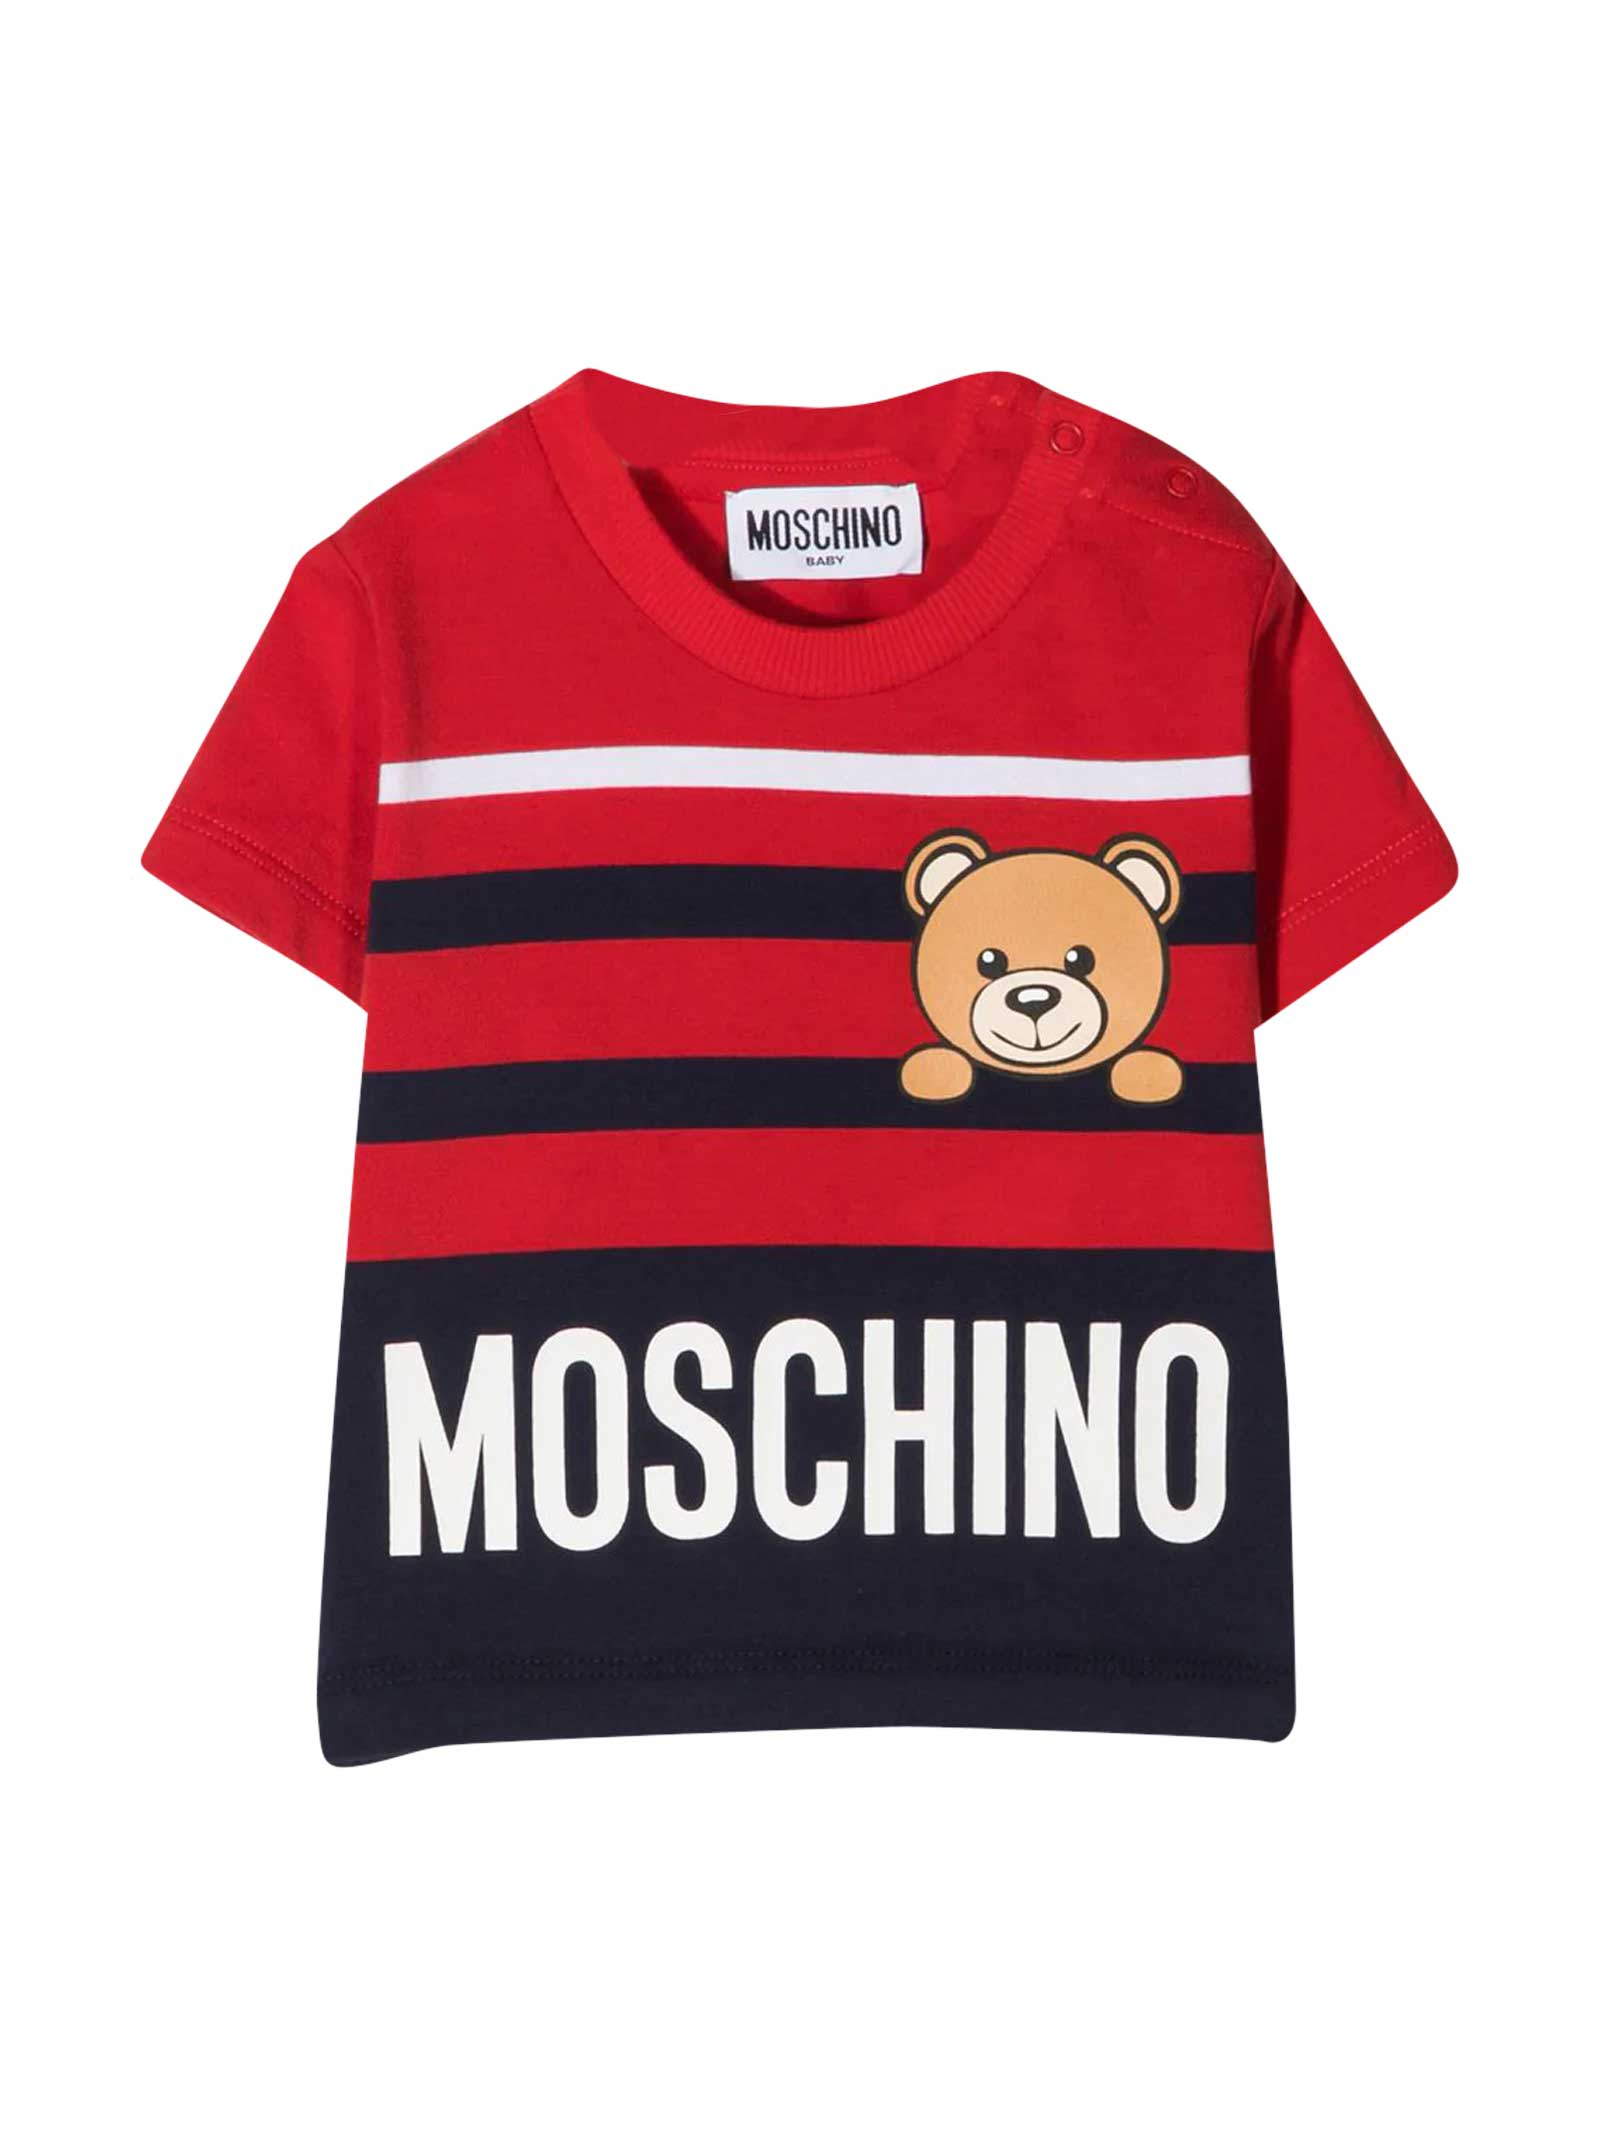 Moschino Babies' Teddy Bear Striped T-shirt In Red And Blue